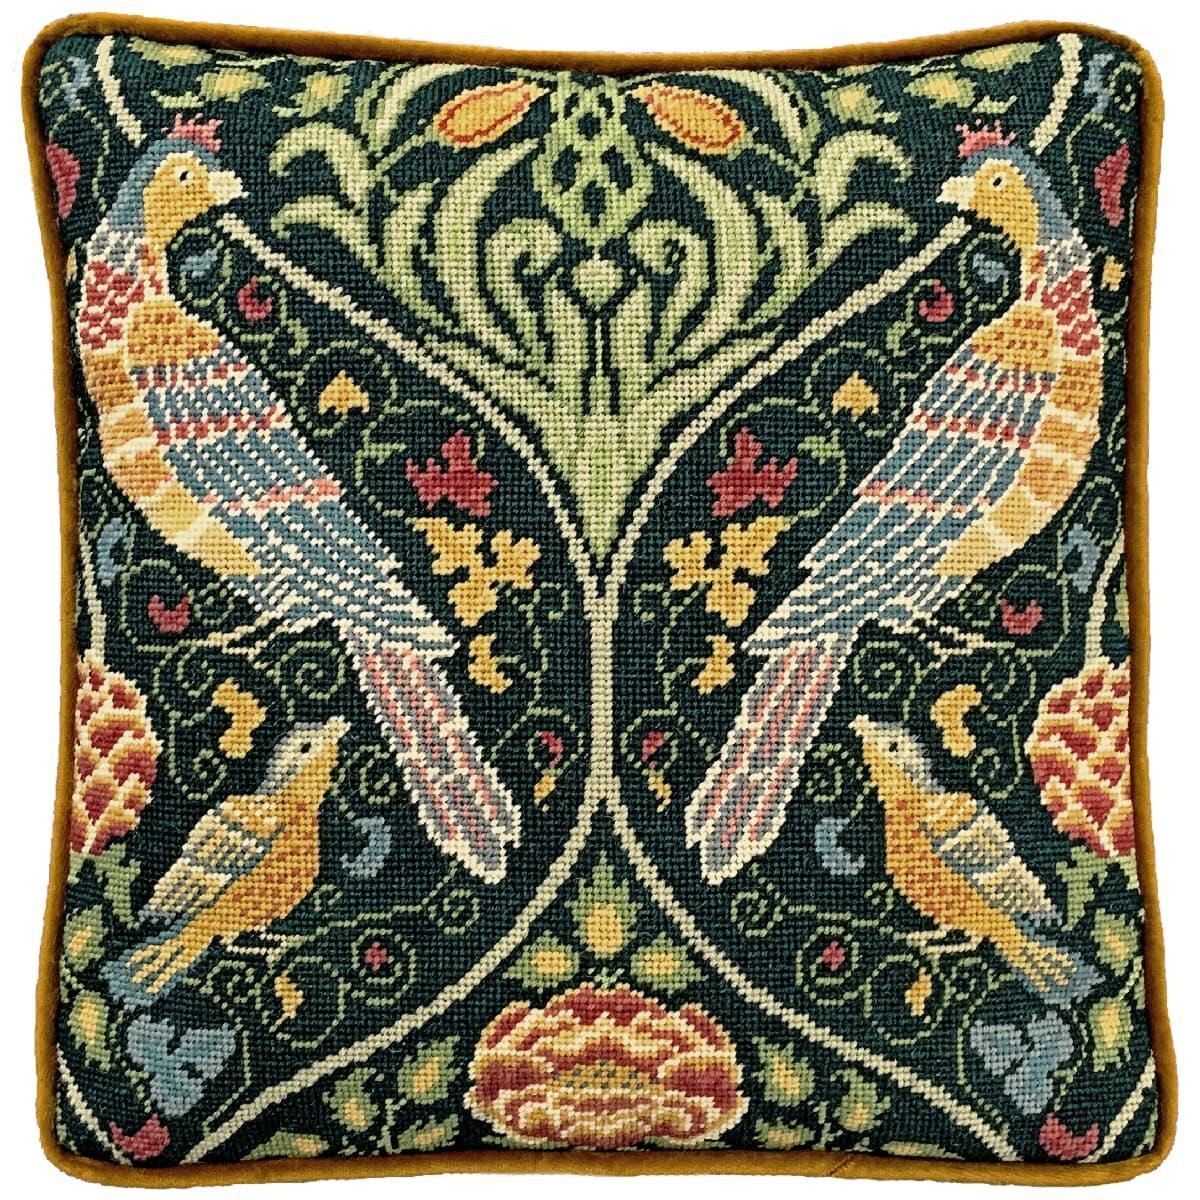 A square cushion with intricate needlepoint embroidery,...